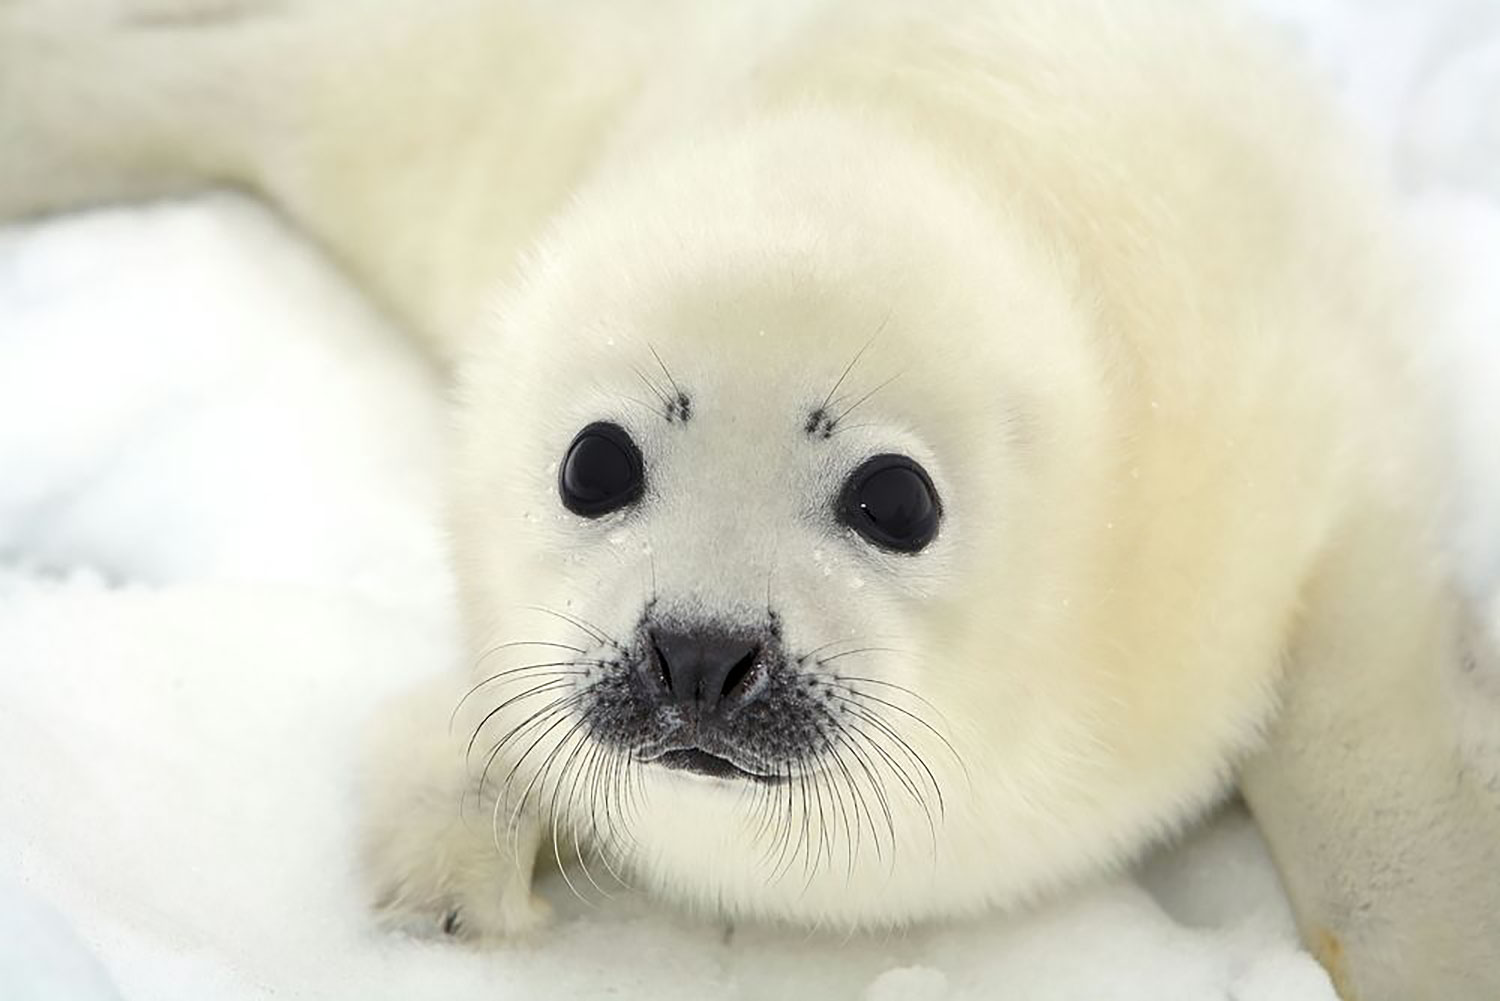 Baby harp seals will no longer be killed for their fur